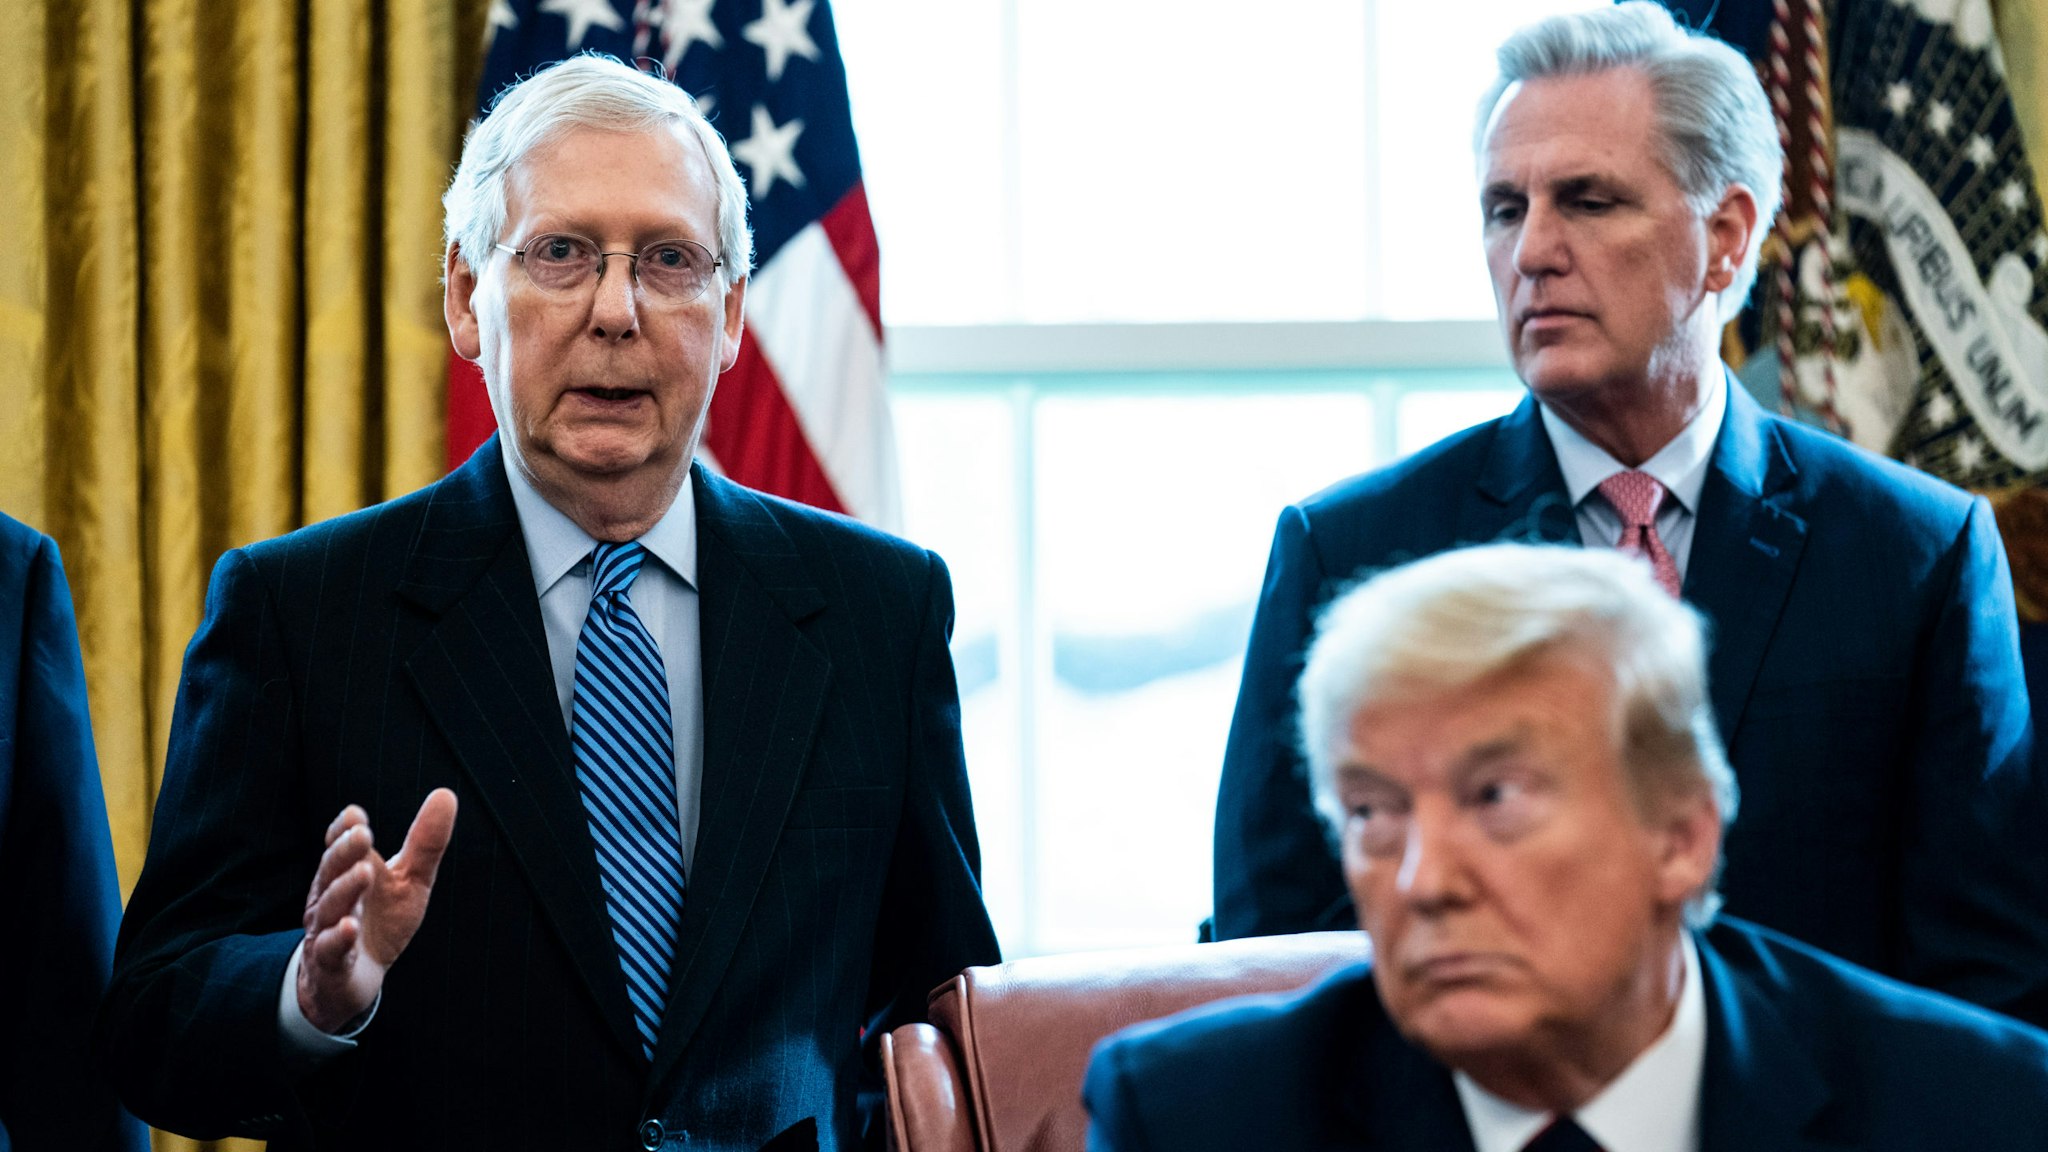 WASHINGTON, DC - MARCH 27: (L-R) Senate Majority Leader Mitch McConnell (R-KY) speaks as House Minority Leader Kevin McCarthy (R-CA) U.S. President Donald Trump listen during a signing ceremony for H.R. 748, the CARES Act in the Oval Office of the White House on March 27, 2020 in Washington, DC. Earlier on Friday, the U.S. House of Representatives approved the $2 trillion stimulus bill that lawmakers hope will battle the the economic effects of the COVID-19 pandemic.